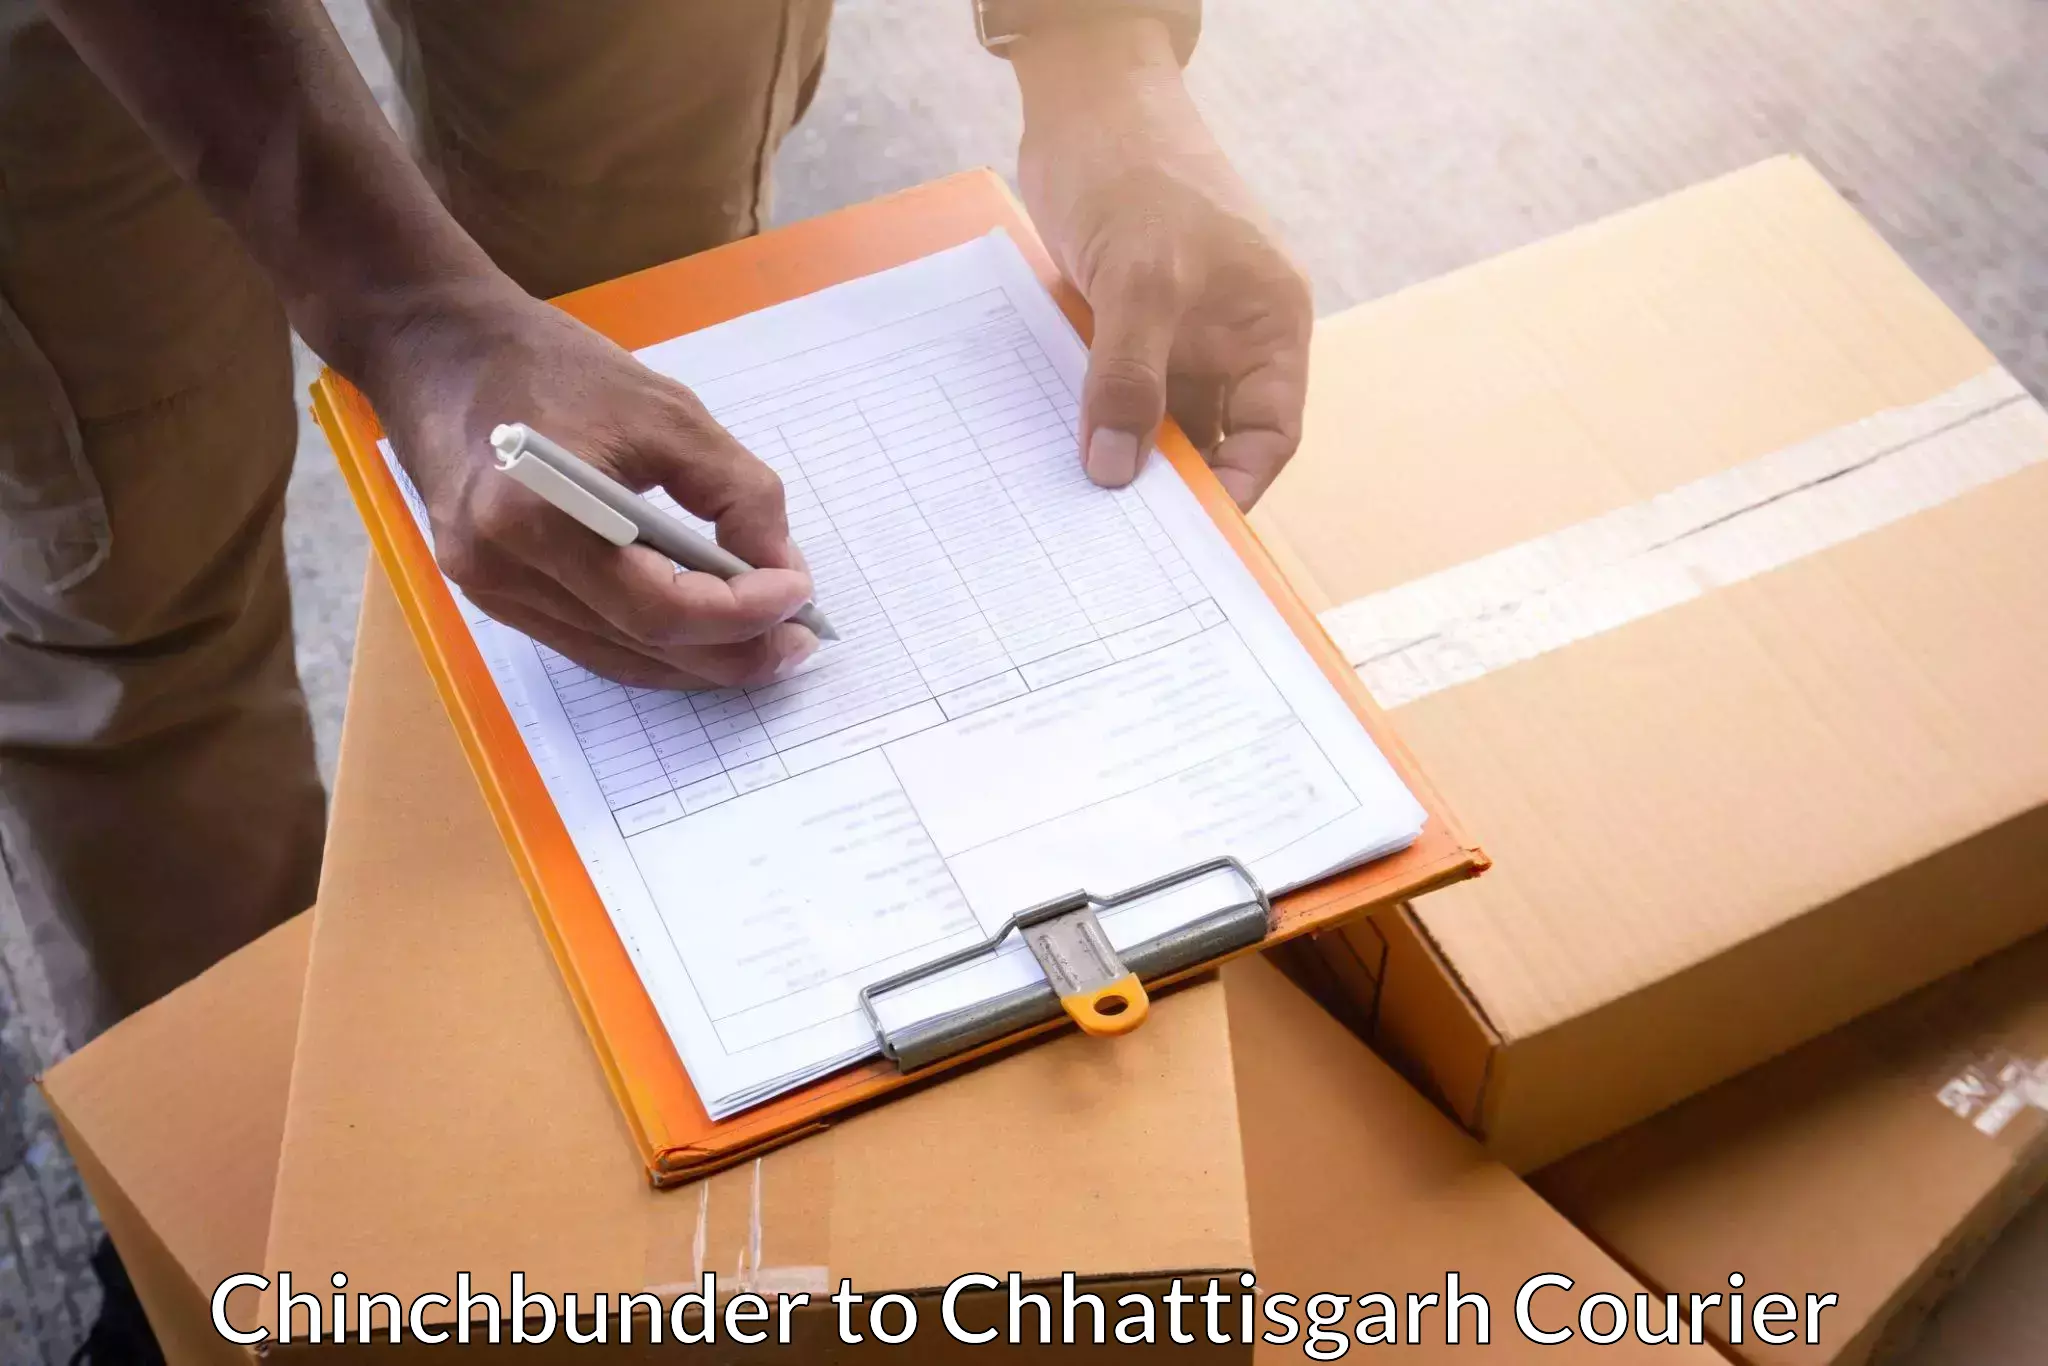 On-call courier service Chinchbunder to Bargidih